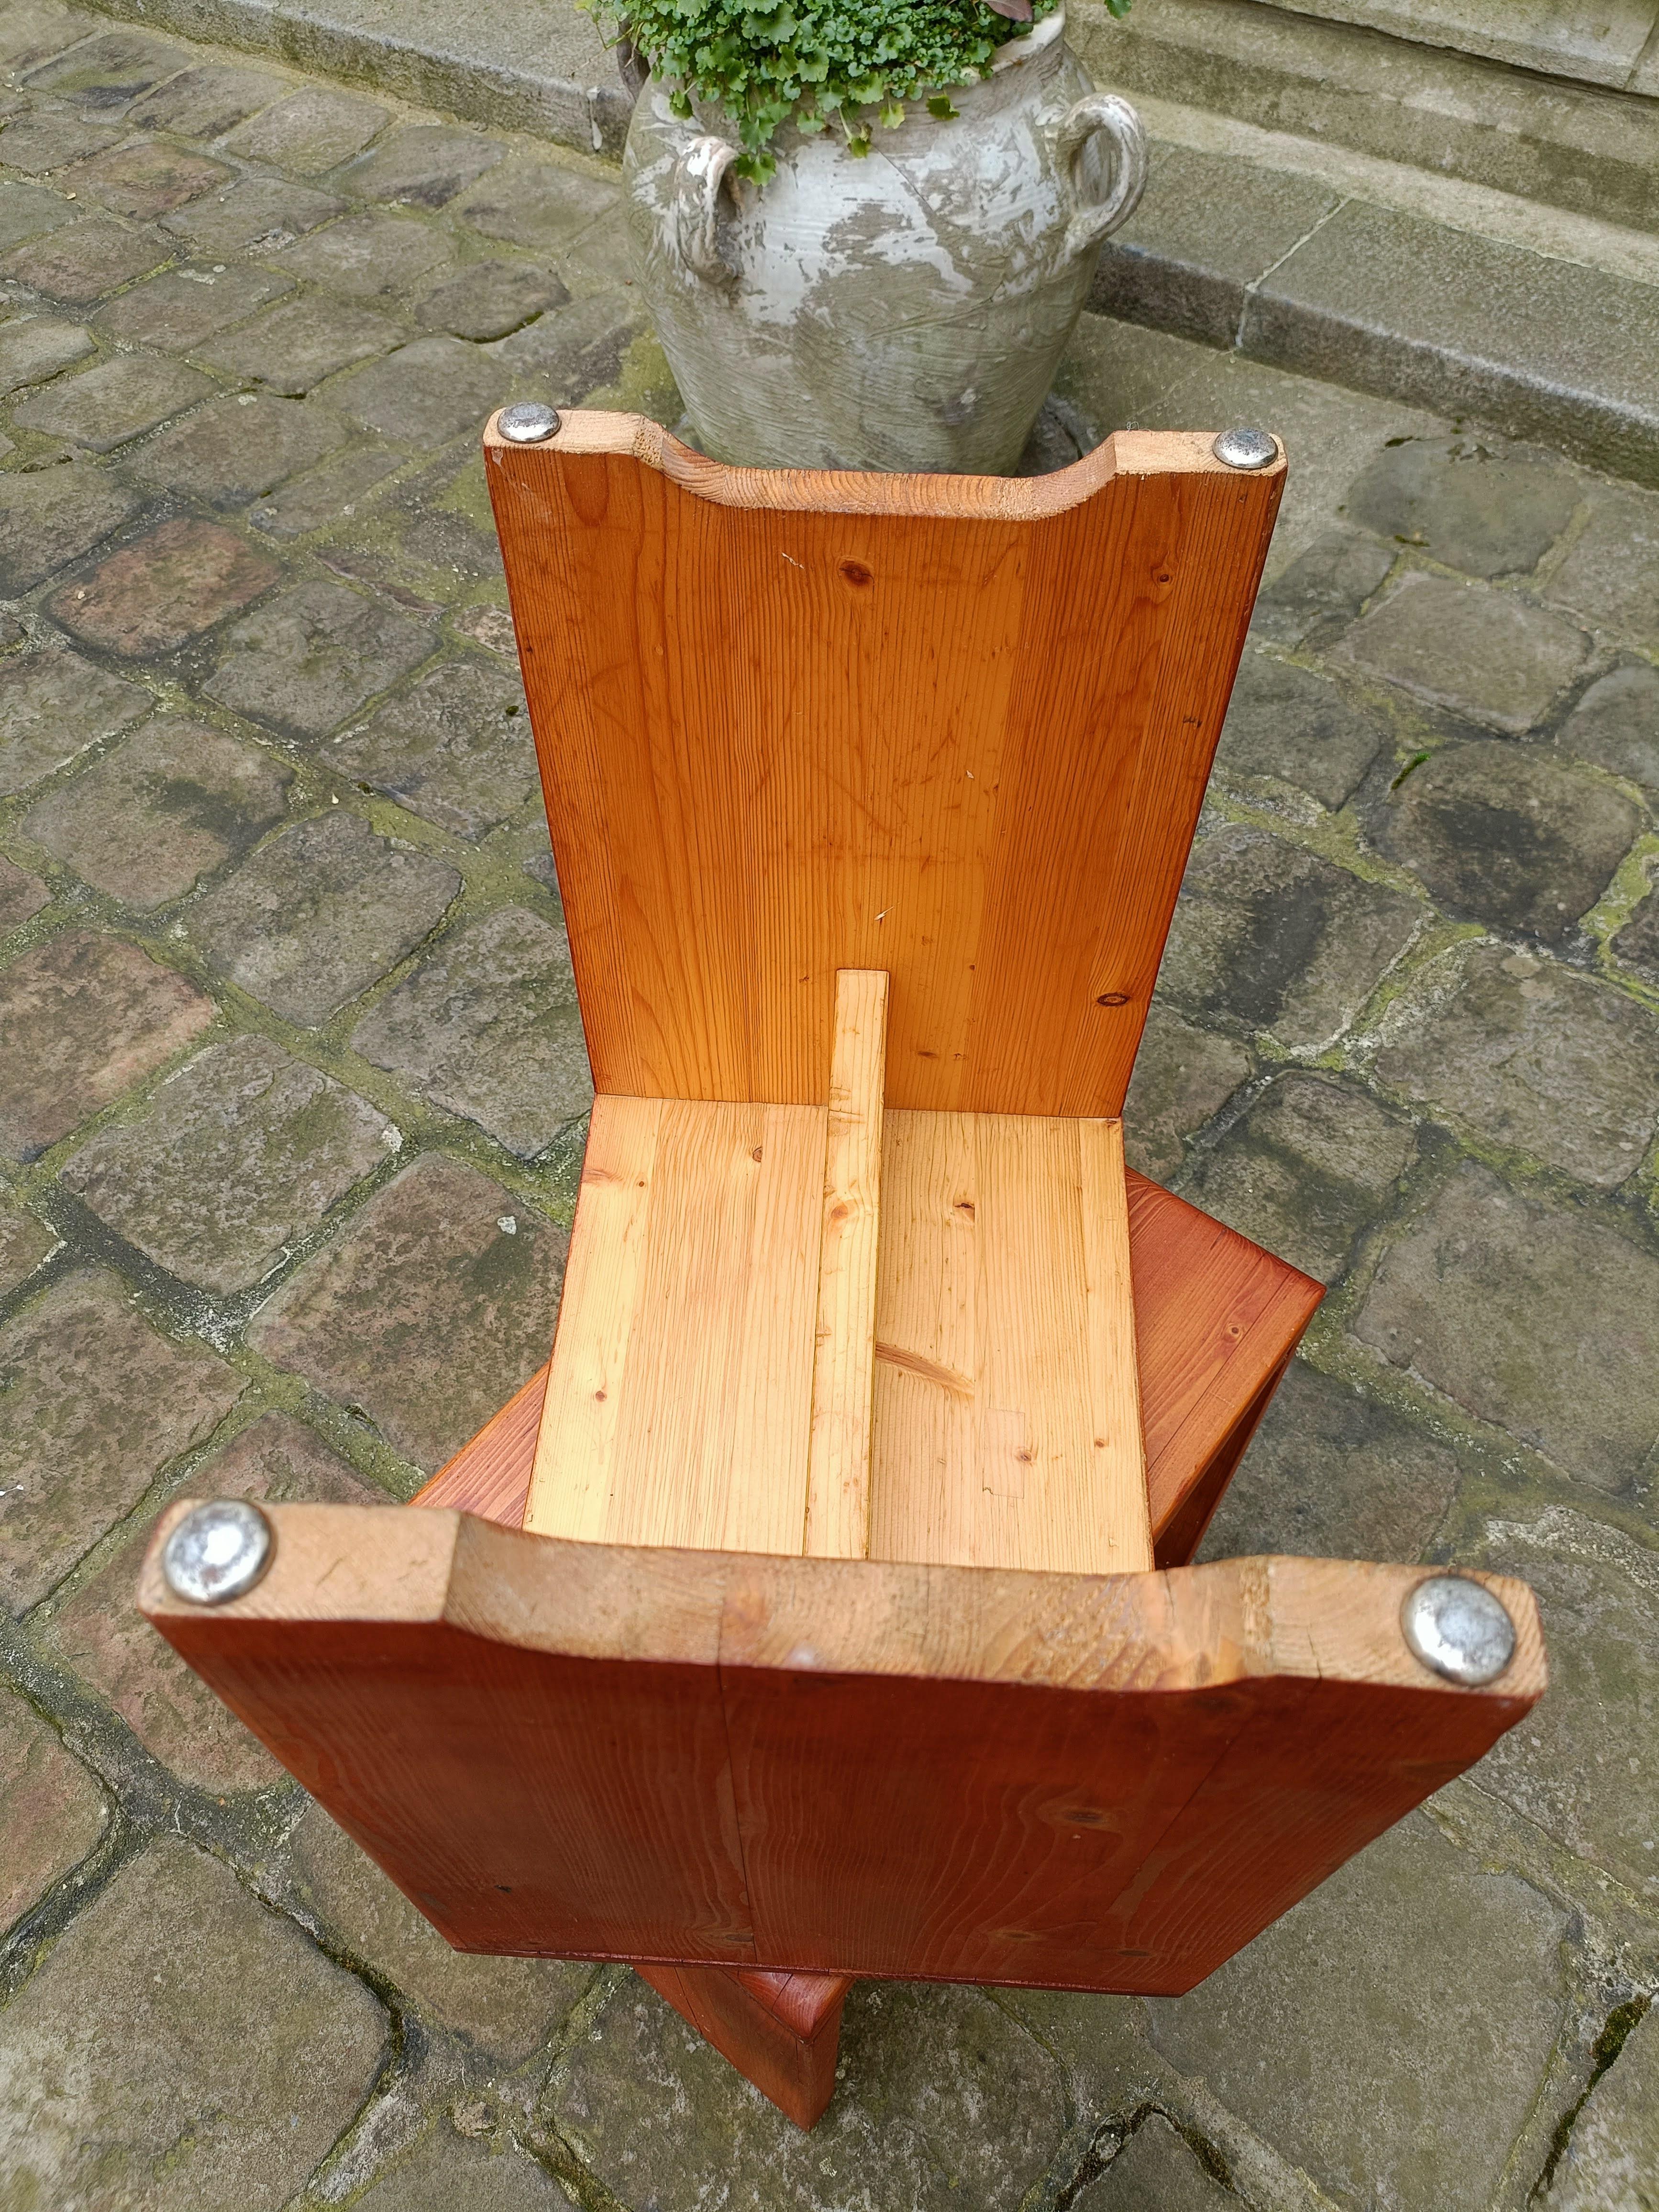 Perriand Pine Wood Stool Charlotte Perriand Pierre Et Vacances Les Arcs, 1800 For Sale 11